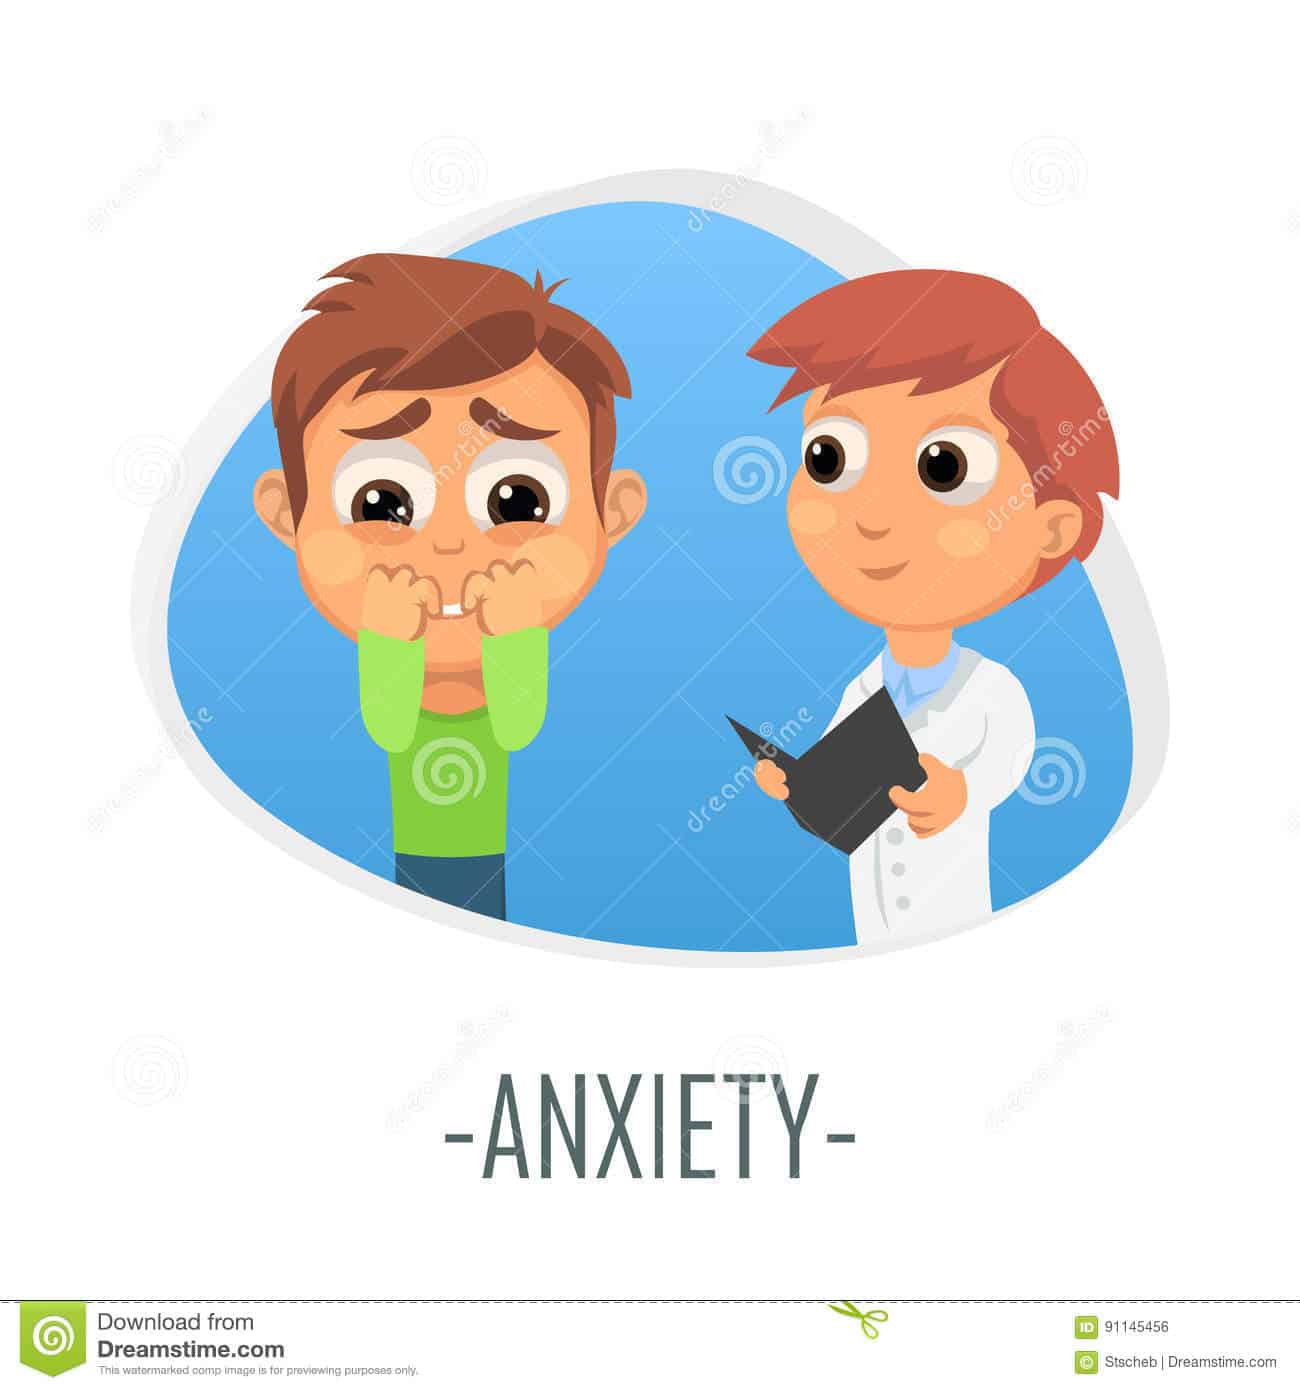 Anxiety Medical Concept. Vector Illustration. Stock Vector ...